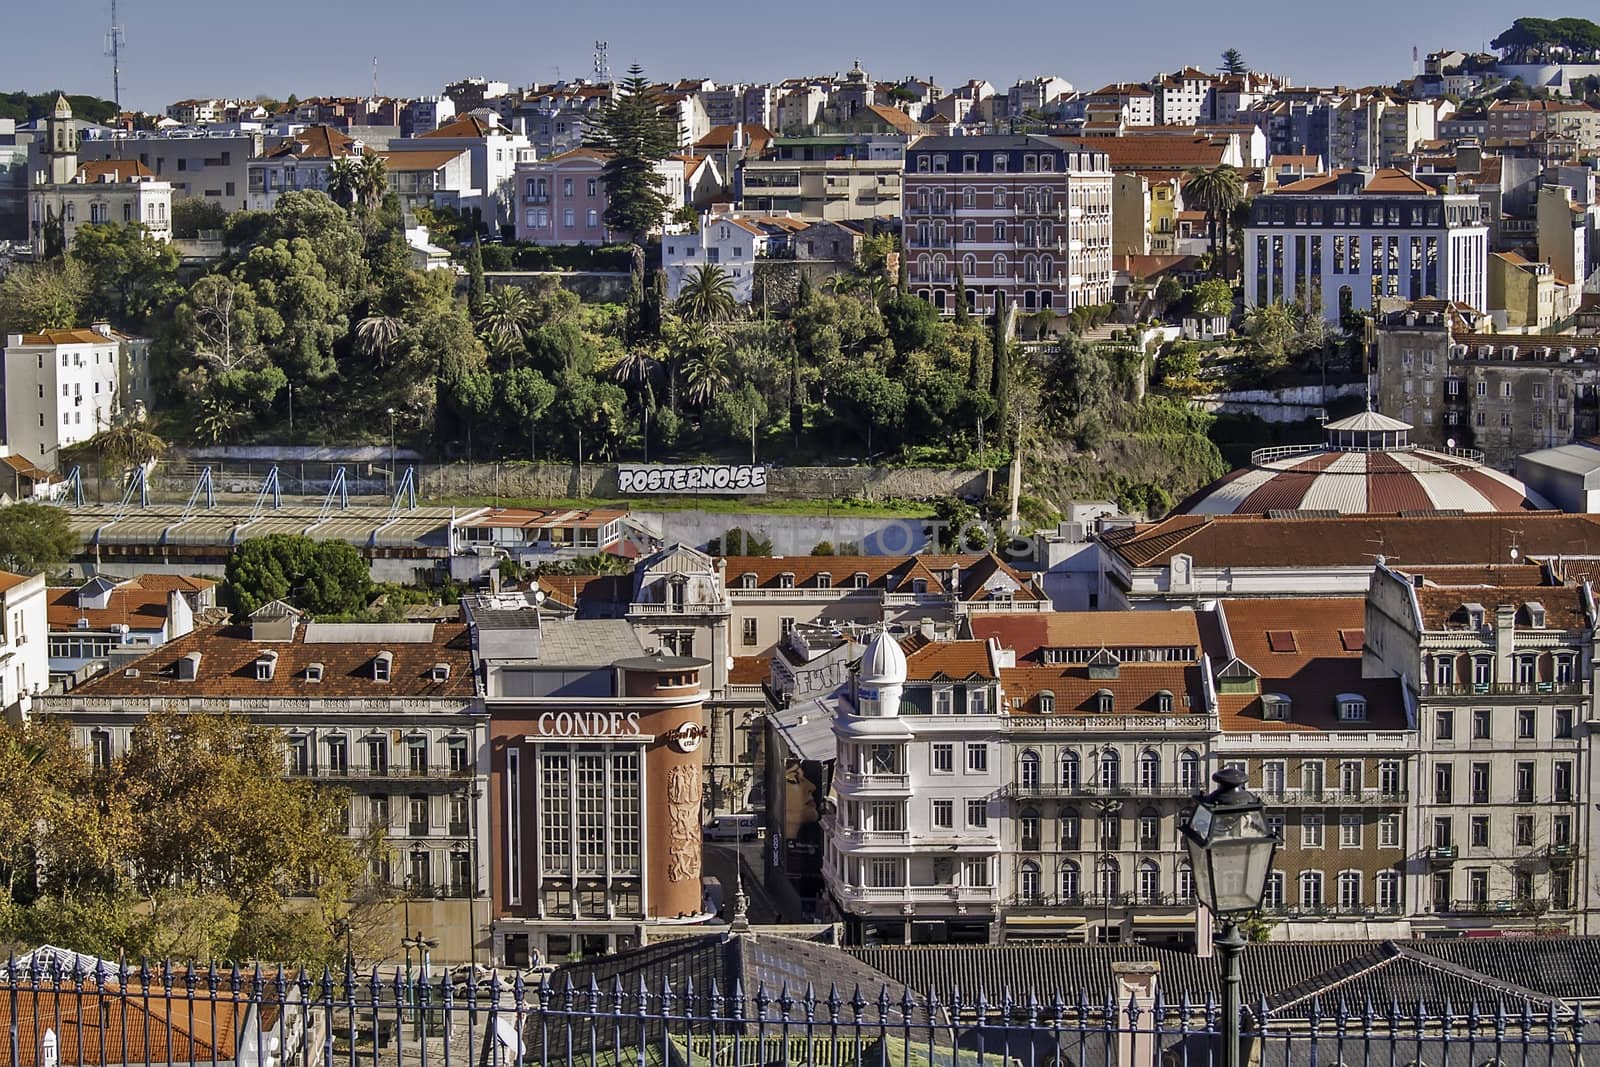 General view of Lisbon downtown and hills from Bairro Alto district, with the ancient cinema Condes, today the Hard Rock Cafe